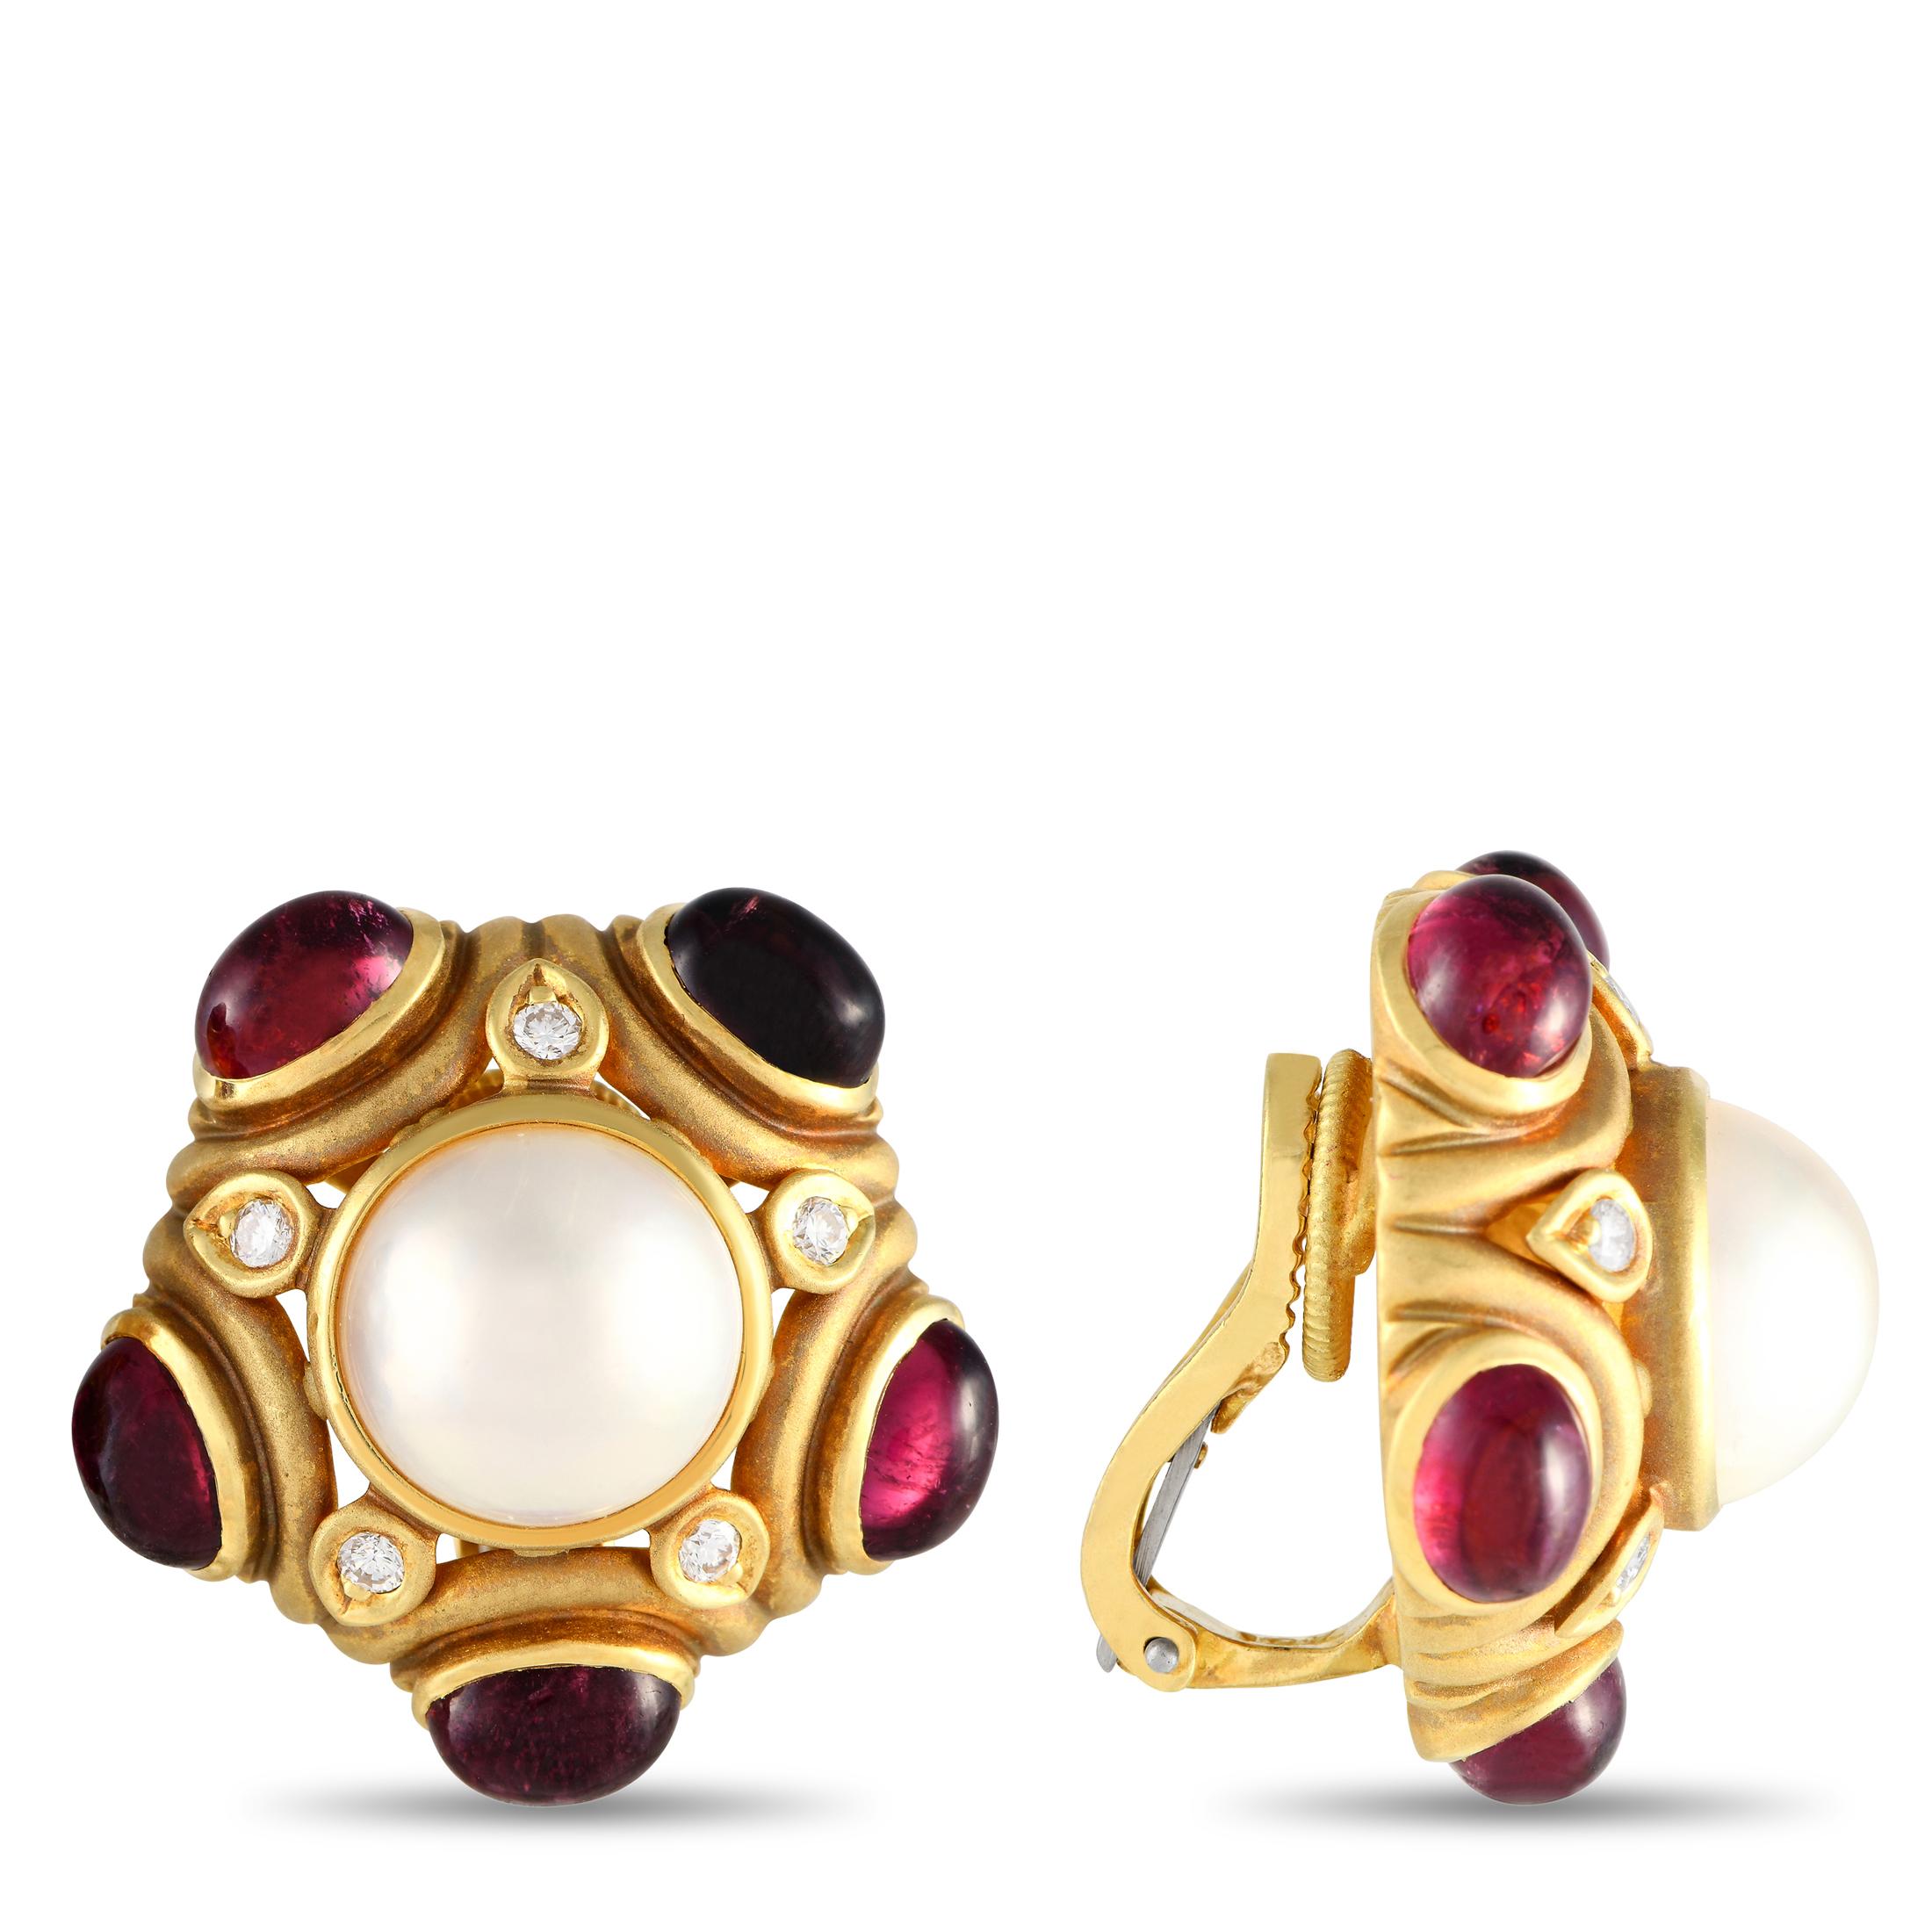 A unique 18K Yellow Gold setting makes these luxury earrings instantly captivating. Each one features an opulent 18K Yellow Gold setting that measures 1.10 round. Red Tourmaline gemstones with a total weight of 12.0 carats add a pop of color to the